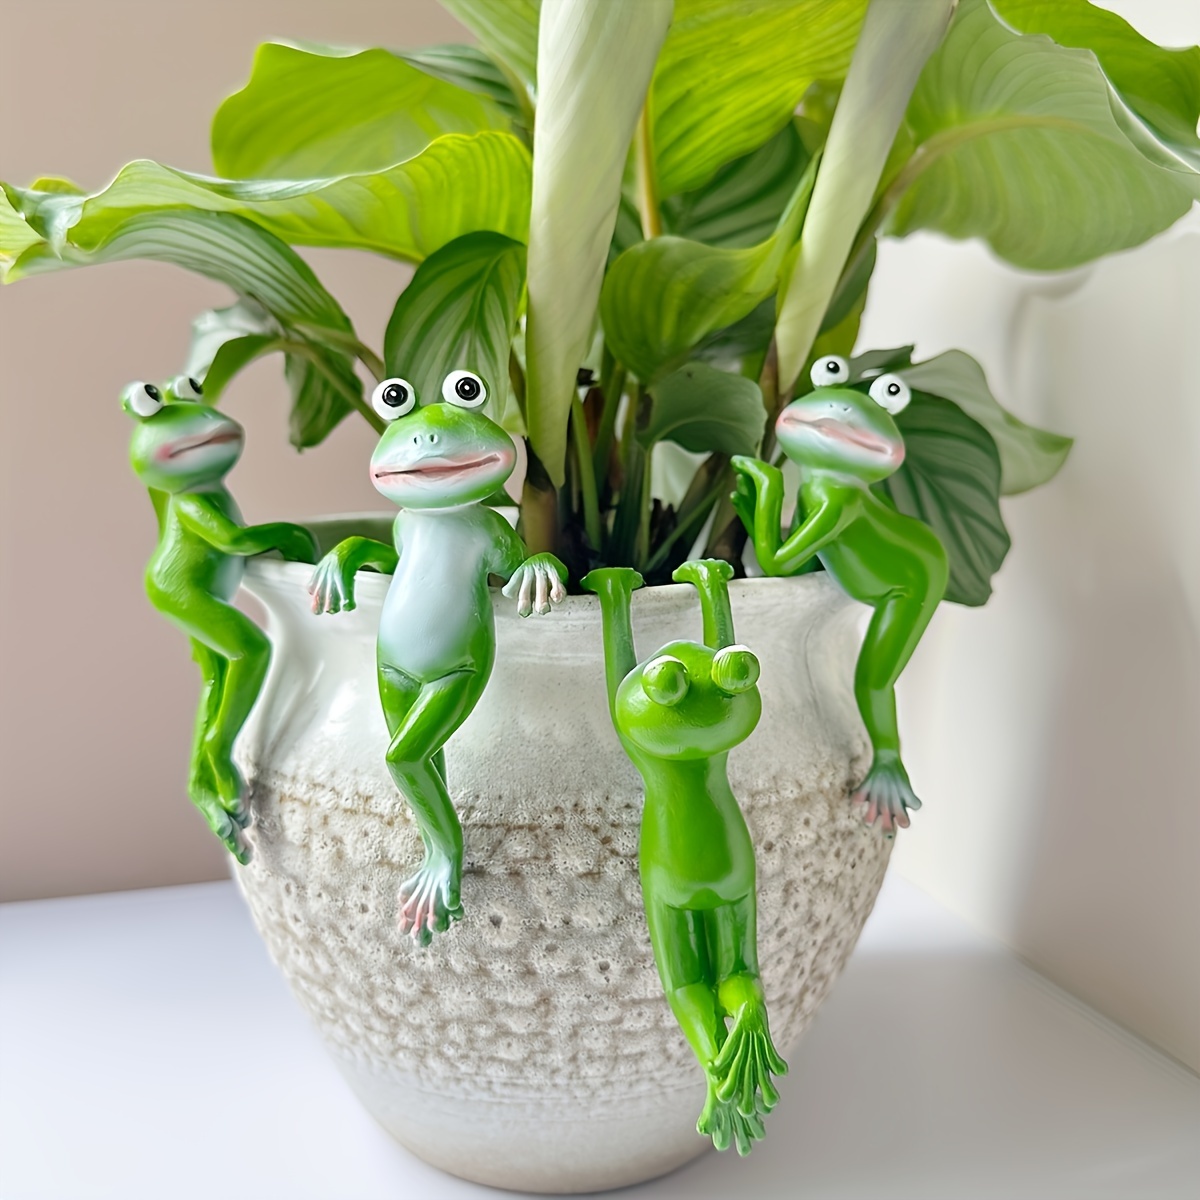 

Art Deco Resin Frog Statues For Outdoor And Garden Decor, Thanksgiving Animal Theme Hanging Ornaments, Creative No-electricity Use Decorative Figurines - 1pc